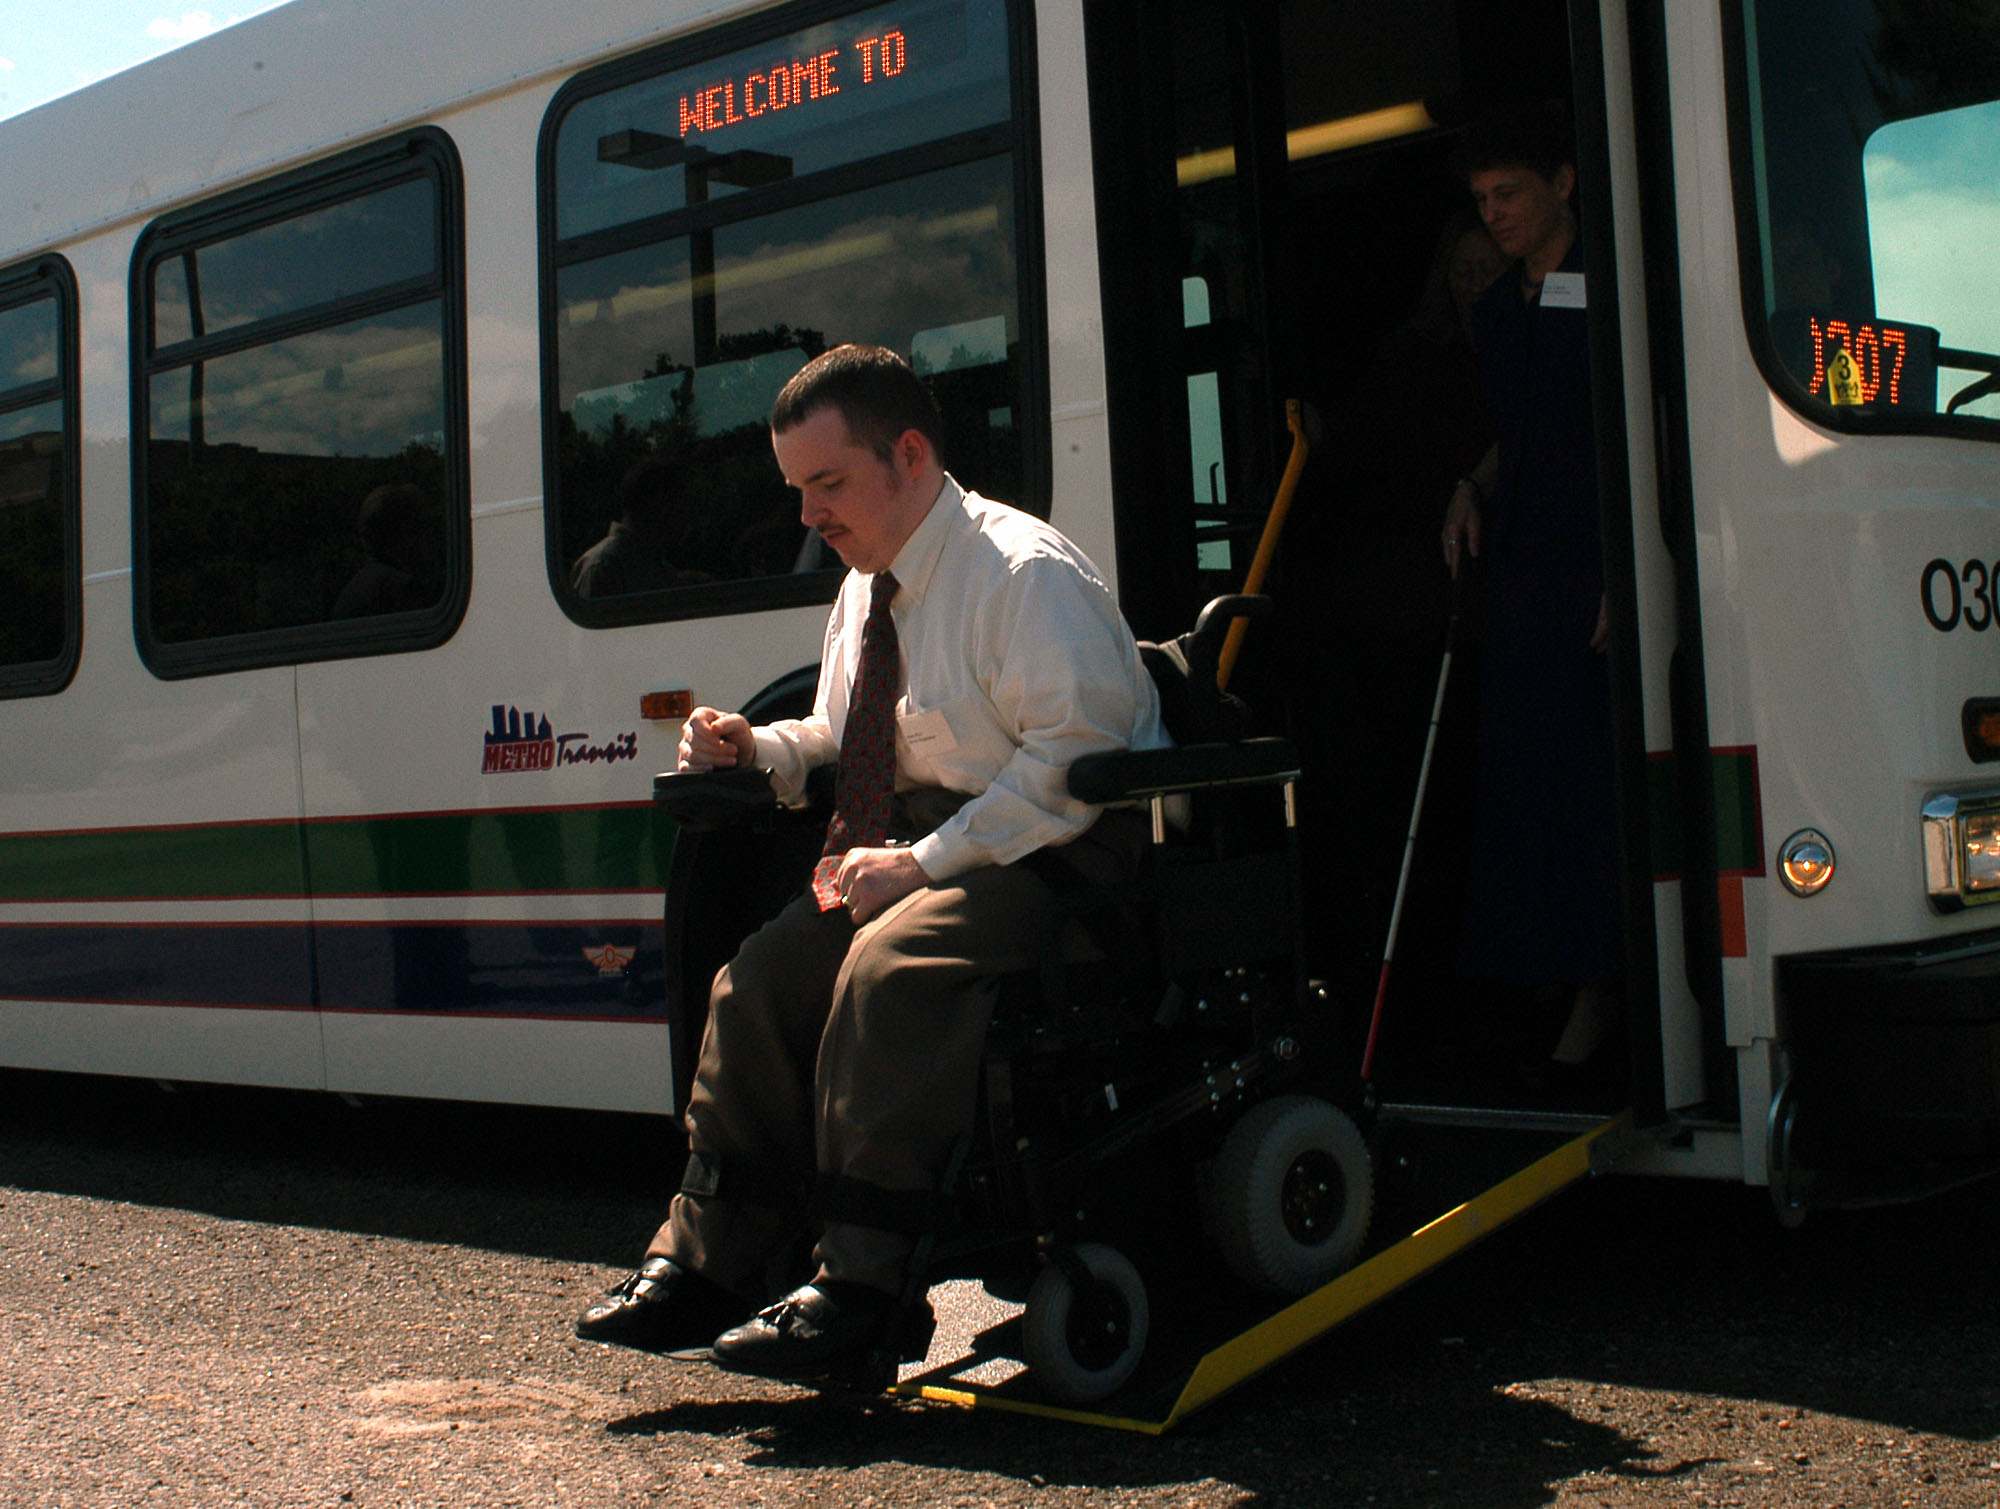 Access-A-Ride vehicles, part of the MTA's paratransit service, are at the center of a lawsuit seeking equal fare discounts for users with disabilities. Photo: Jeffrey Haderthauer/AP